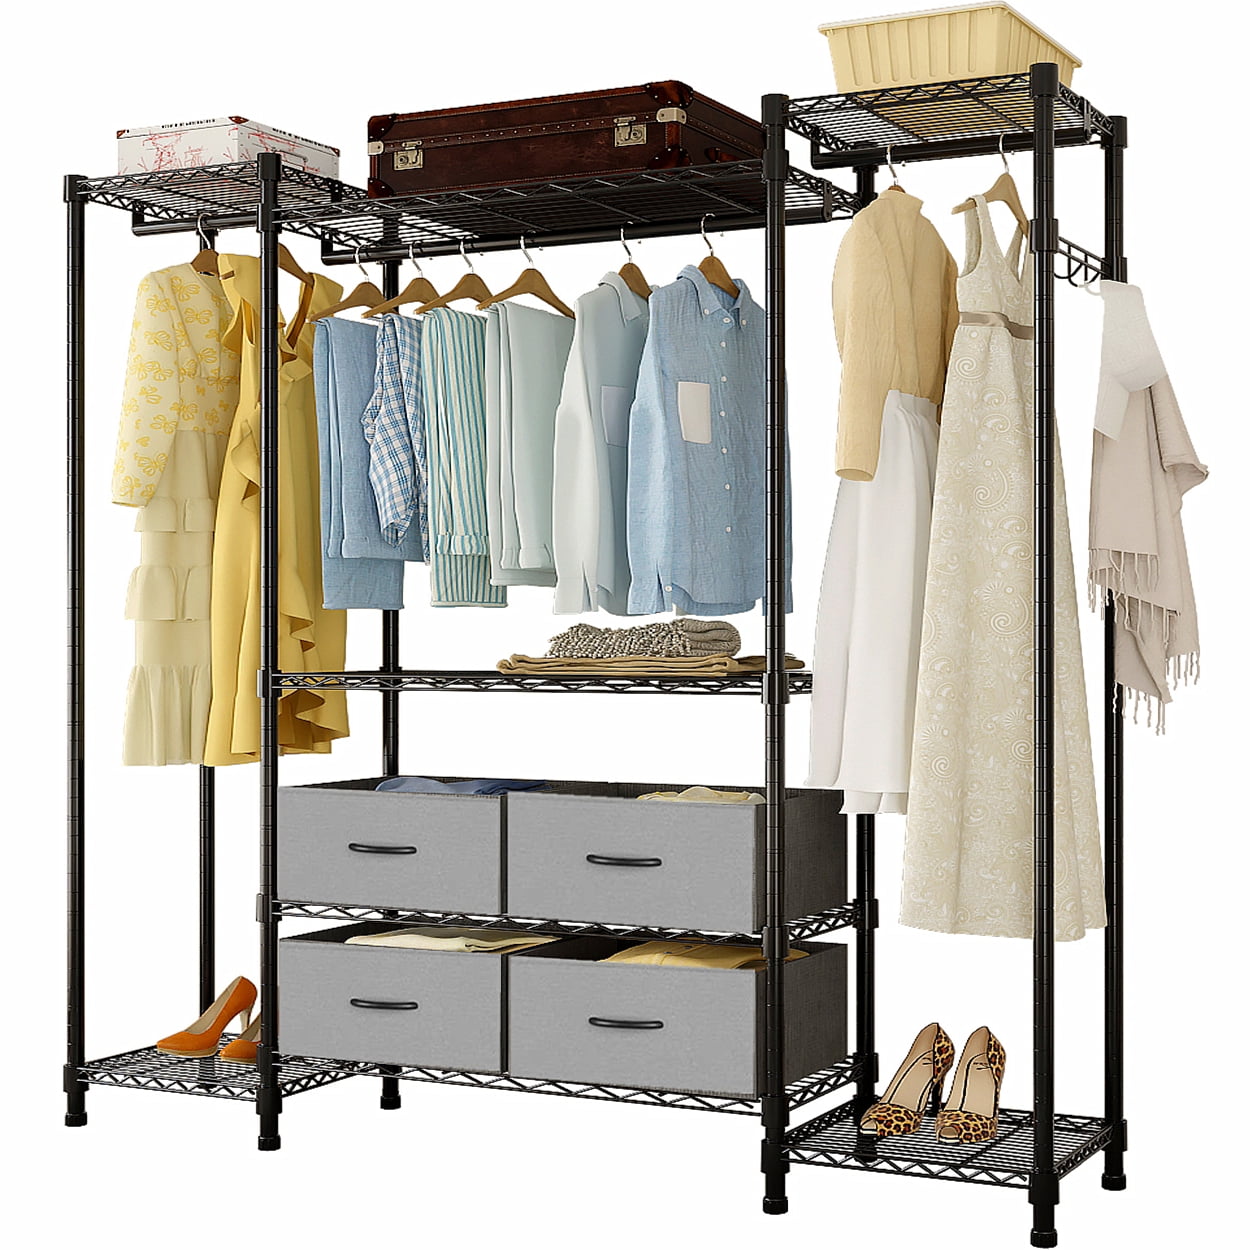 Ktaxon 6 Tiers Wire Garment Rack Heavy Duty Clothes Rack for Hanging ...